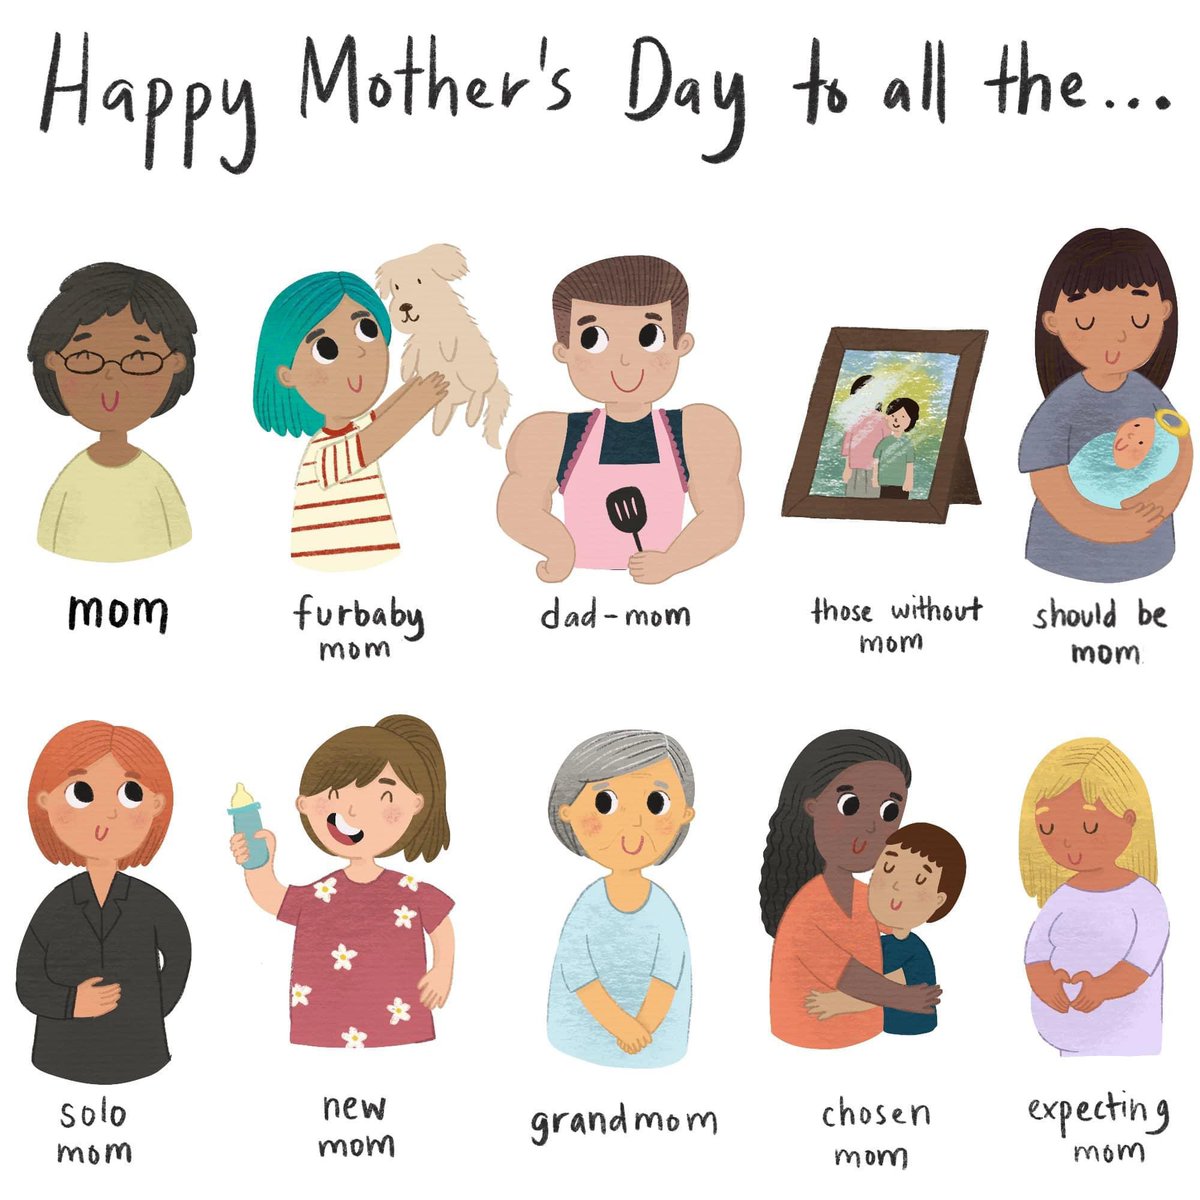 The beauty of motherhood is not in reproduction but in inclusion. Happy mothers day to all mothers seeing this post.